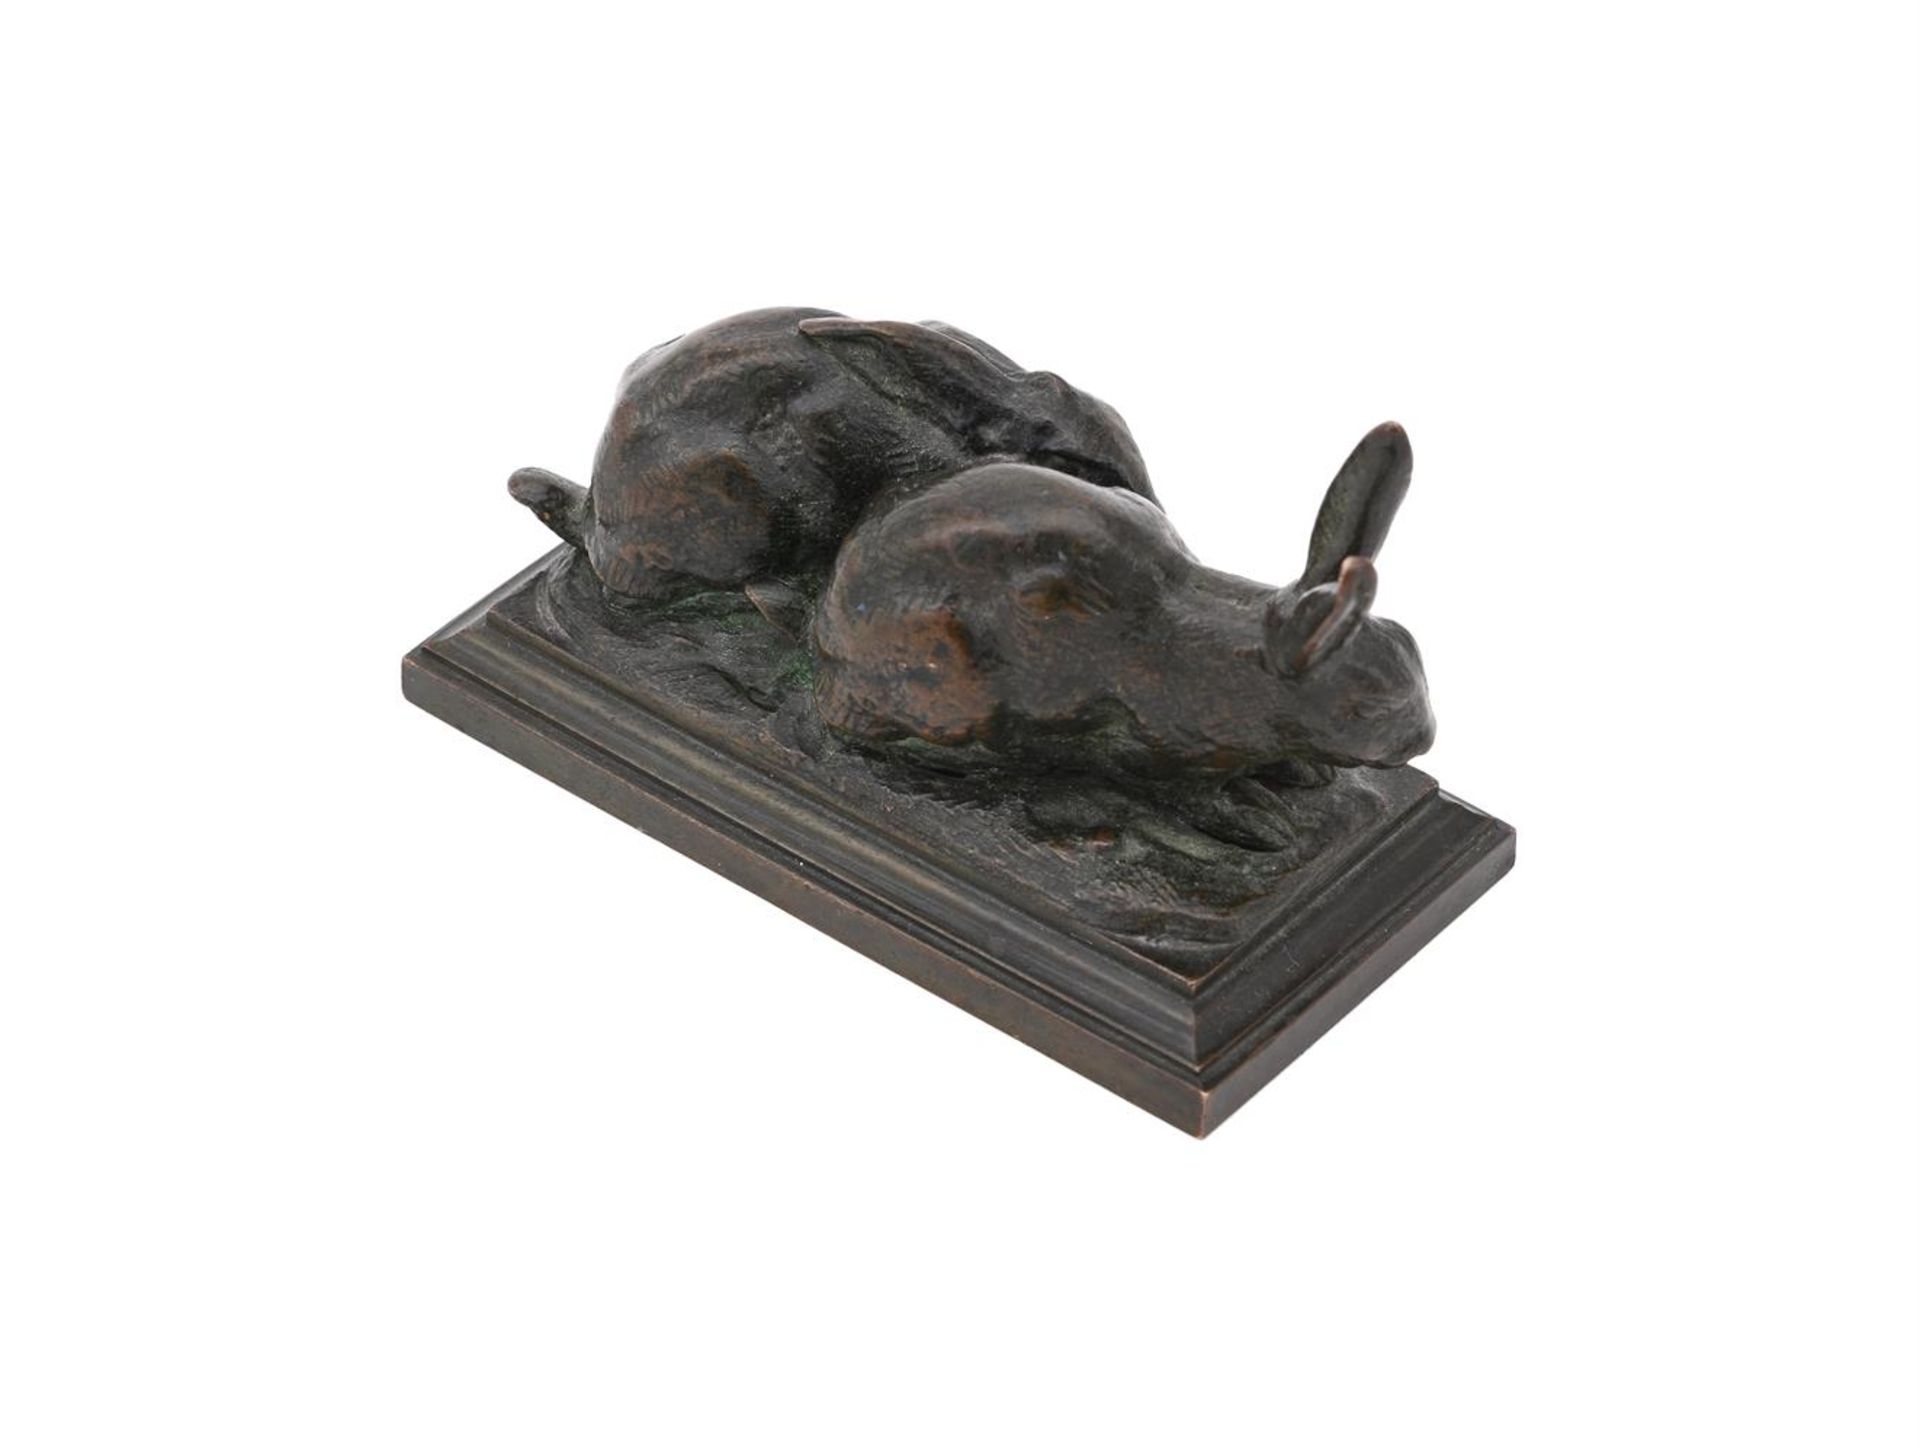 ANTOINE-LOUIS BARYE (FRENCH, 1795-1875), A BRONZE GROUP OF A PAIR OF RABBITS - Image 4 of 5